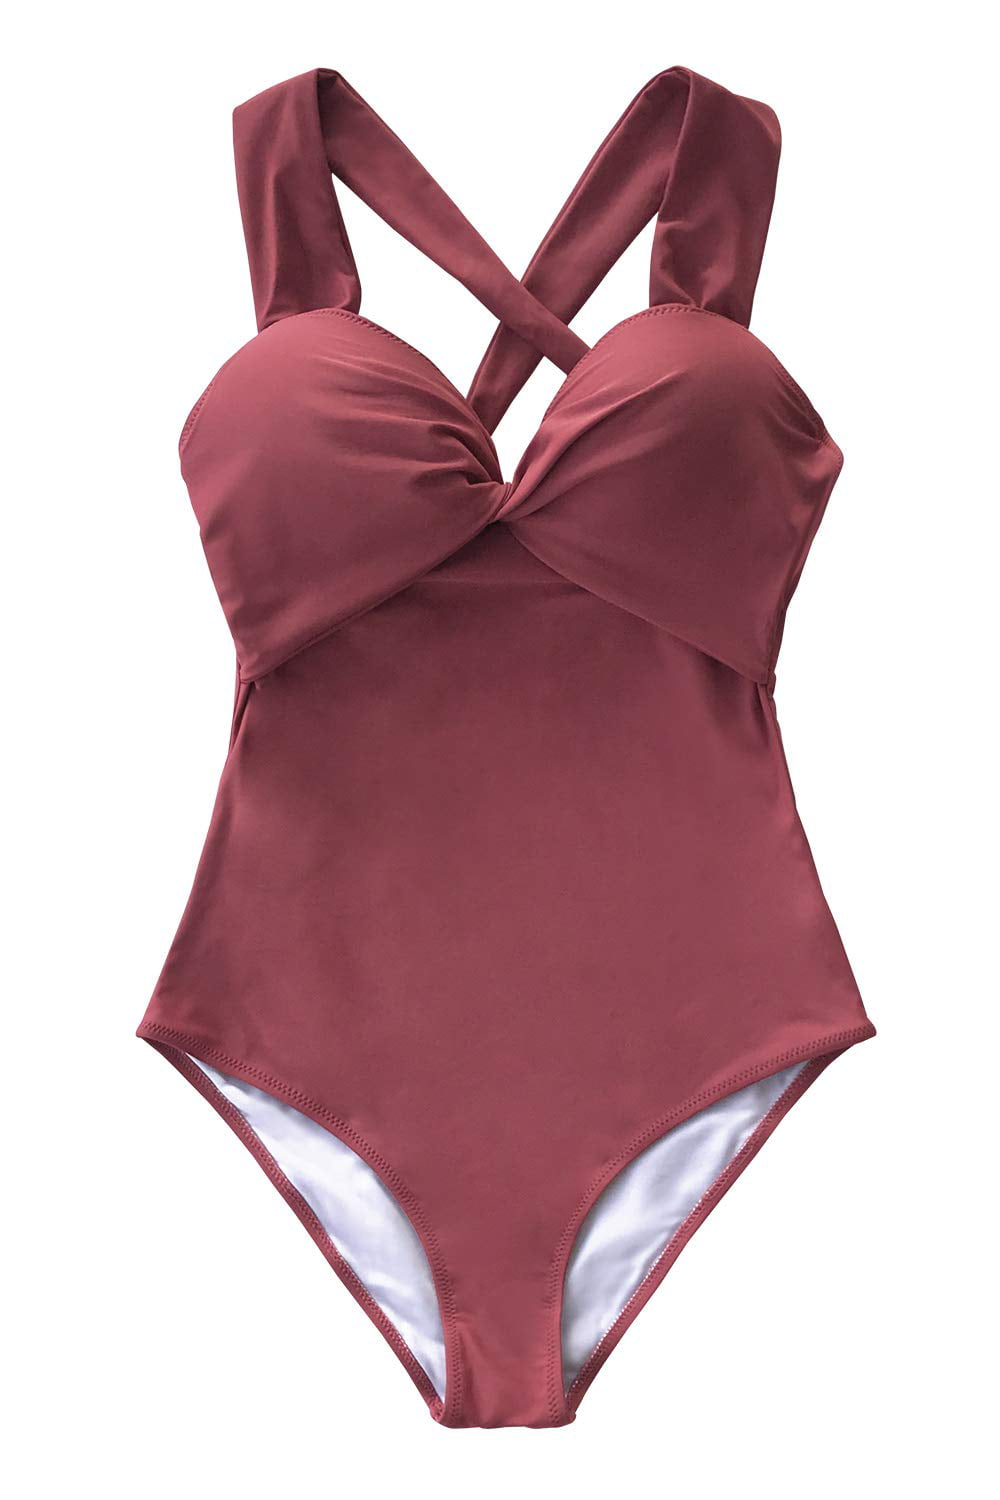 Cupshe - Women's Solid Red Twist and Cross One Piece Swimsuit ...